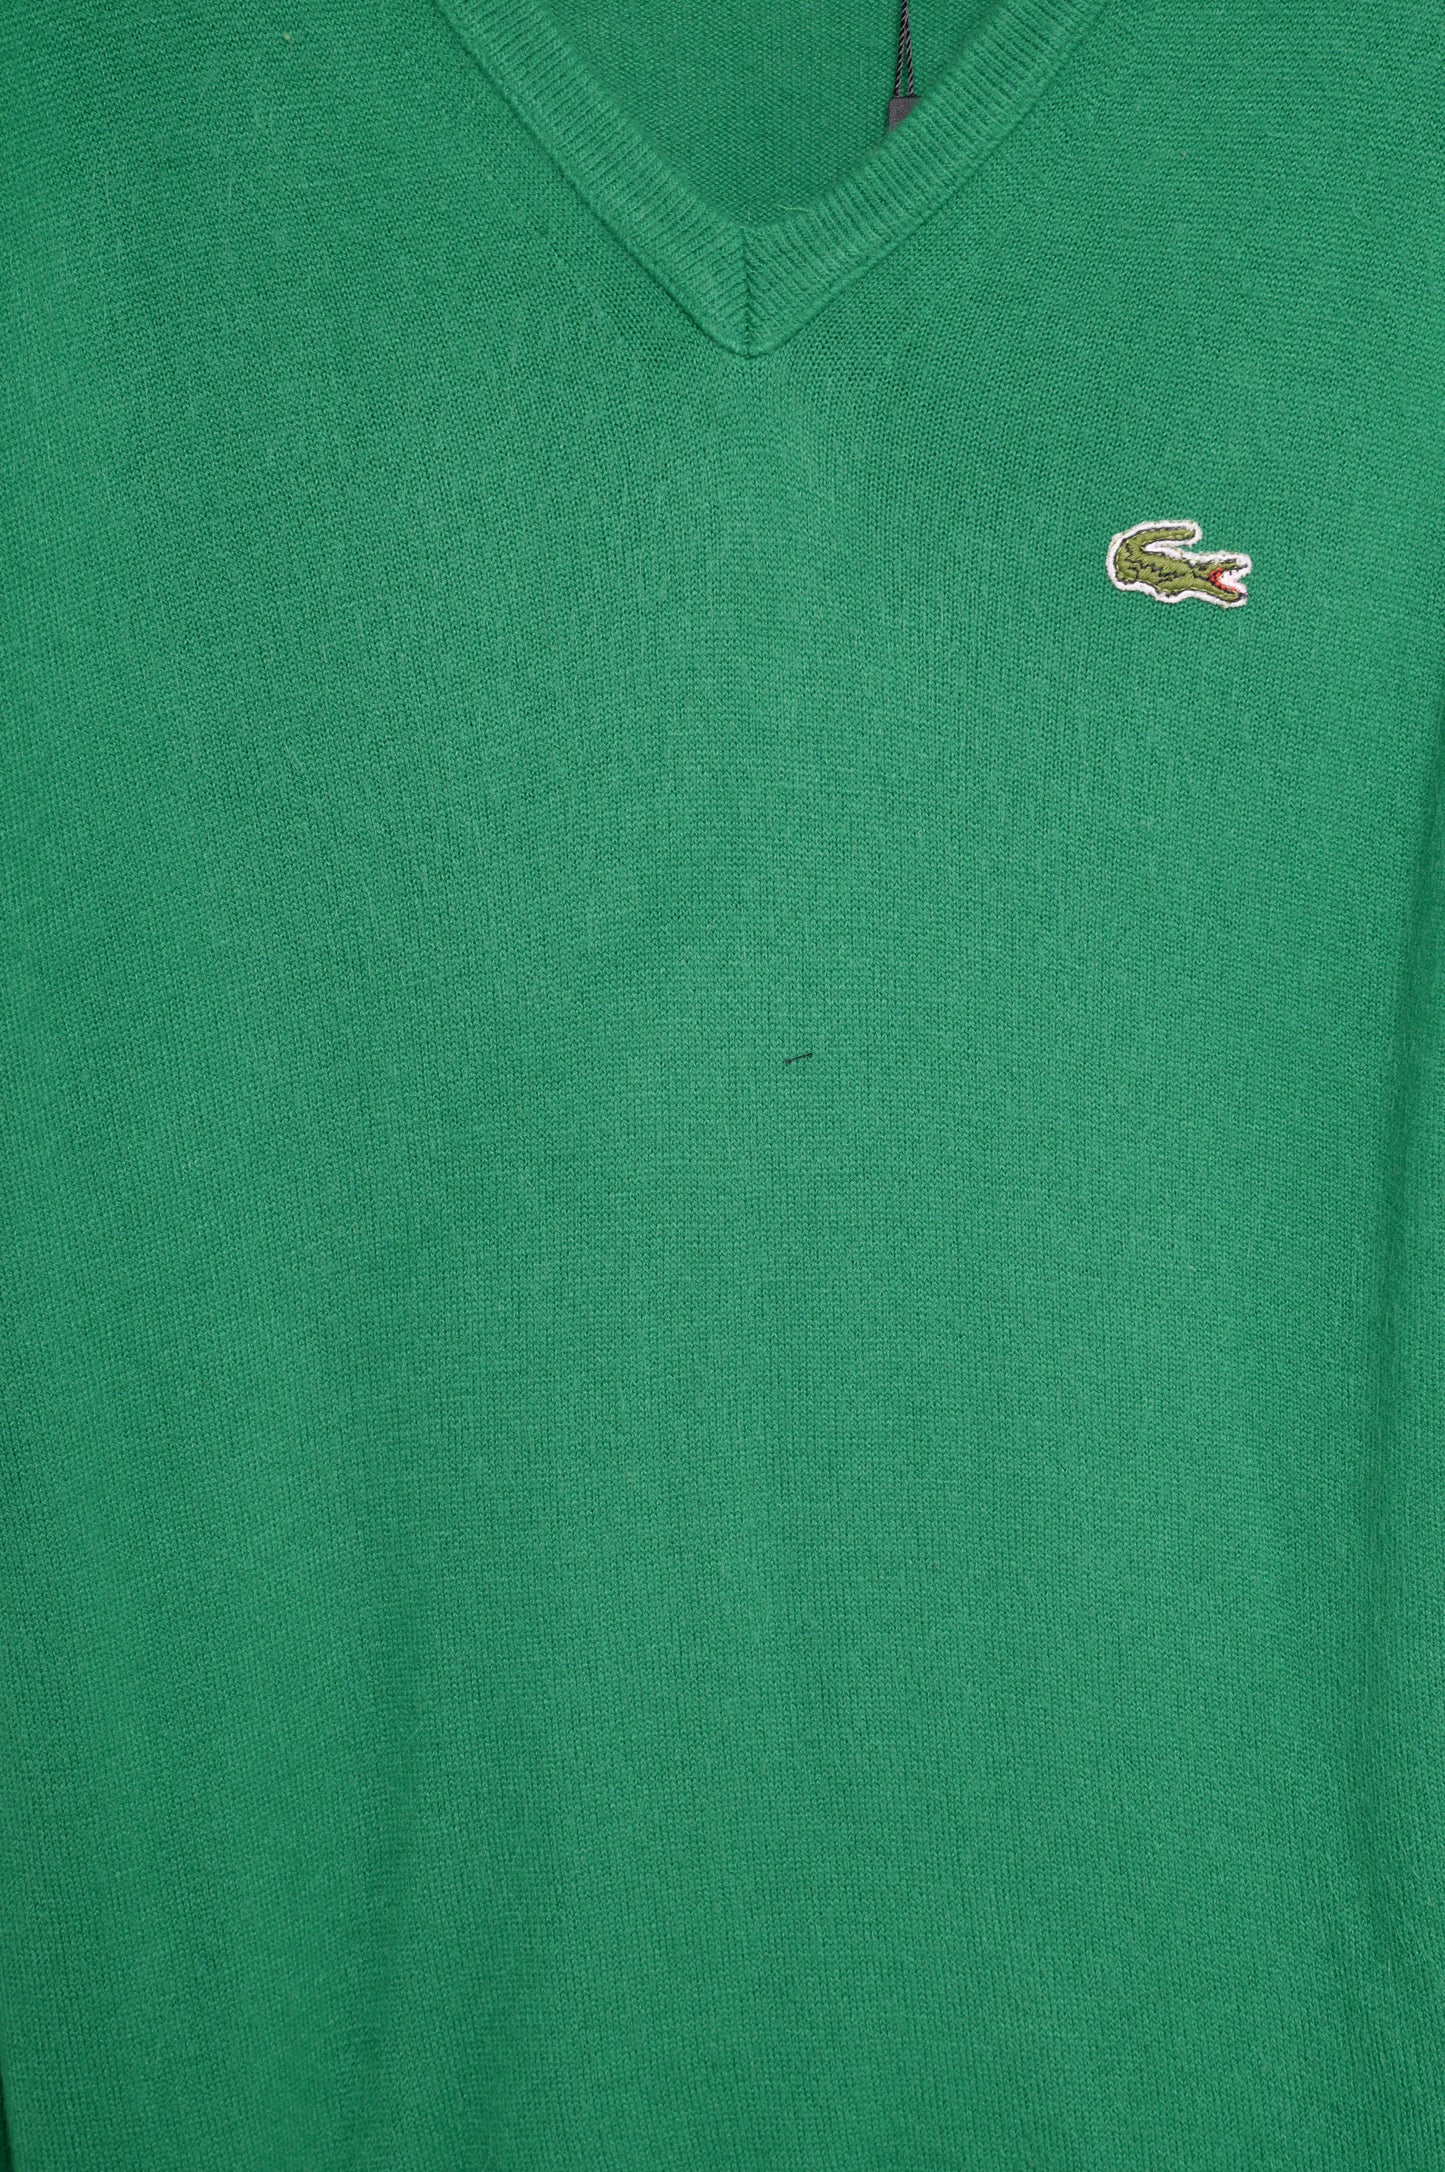 1980s Lacoste Sweater